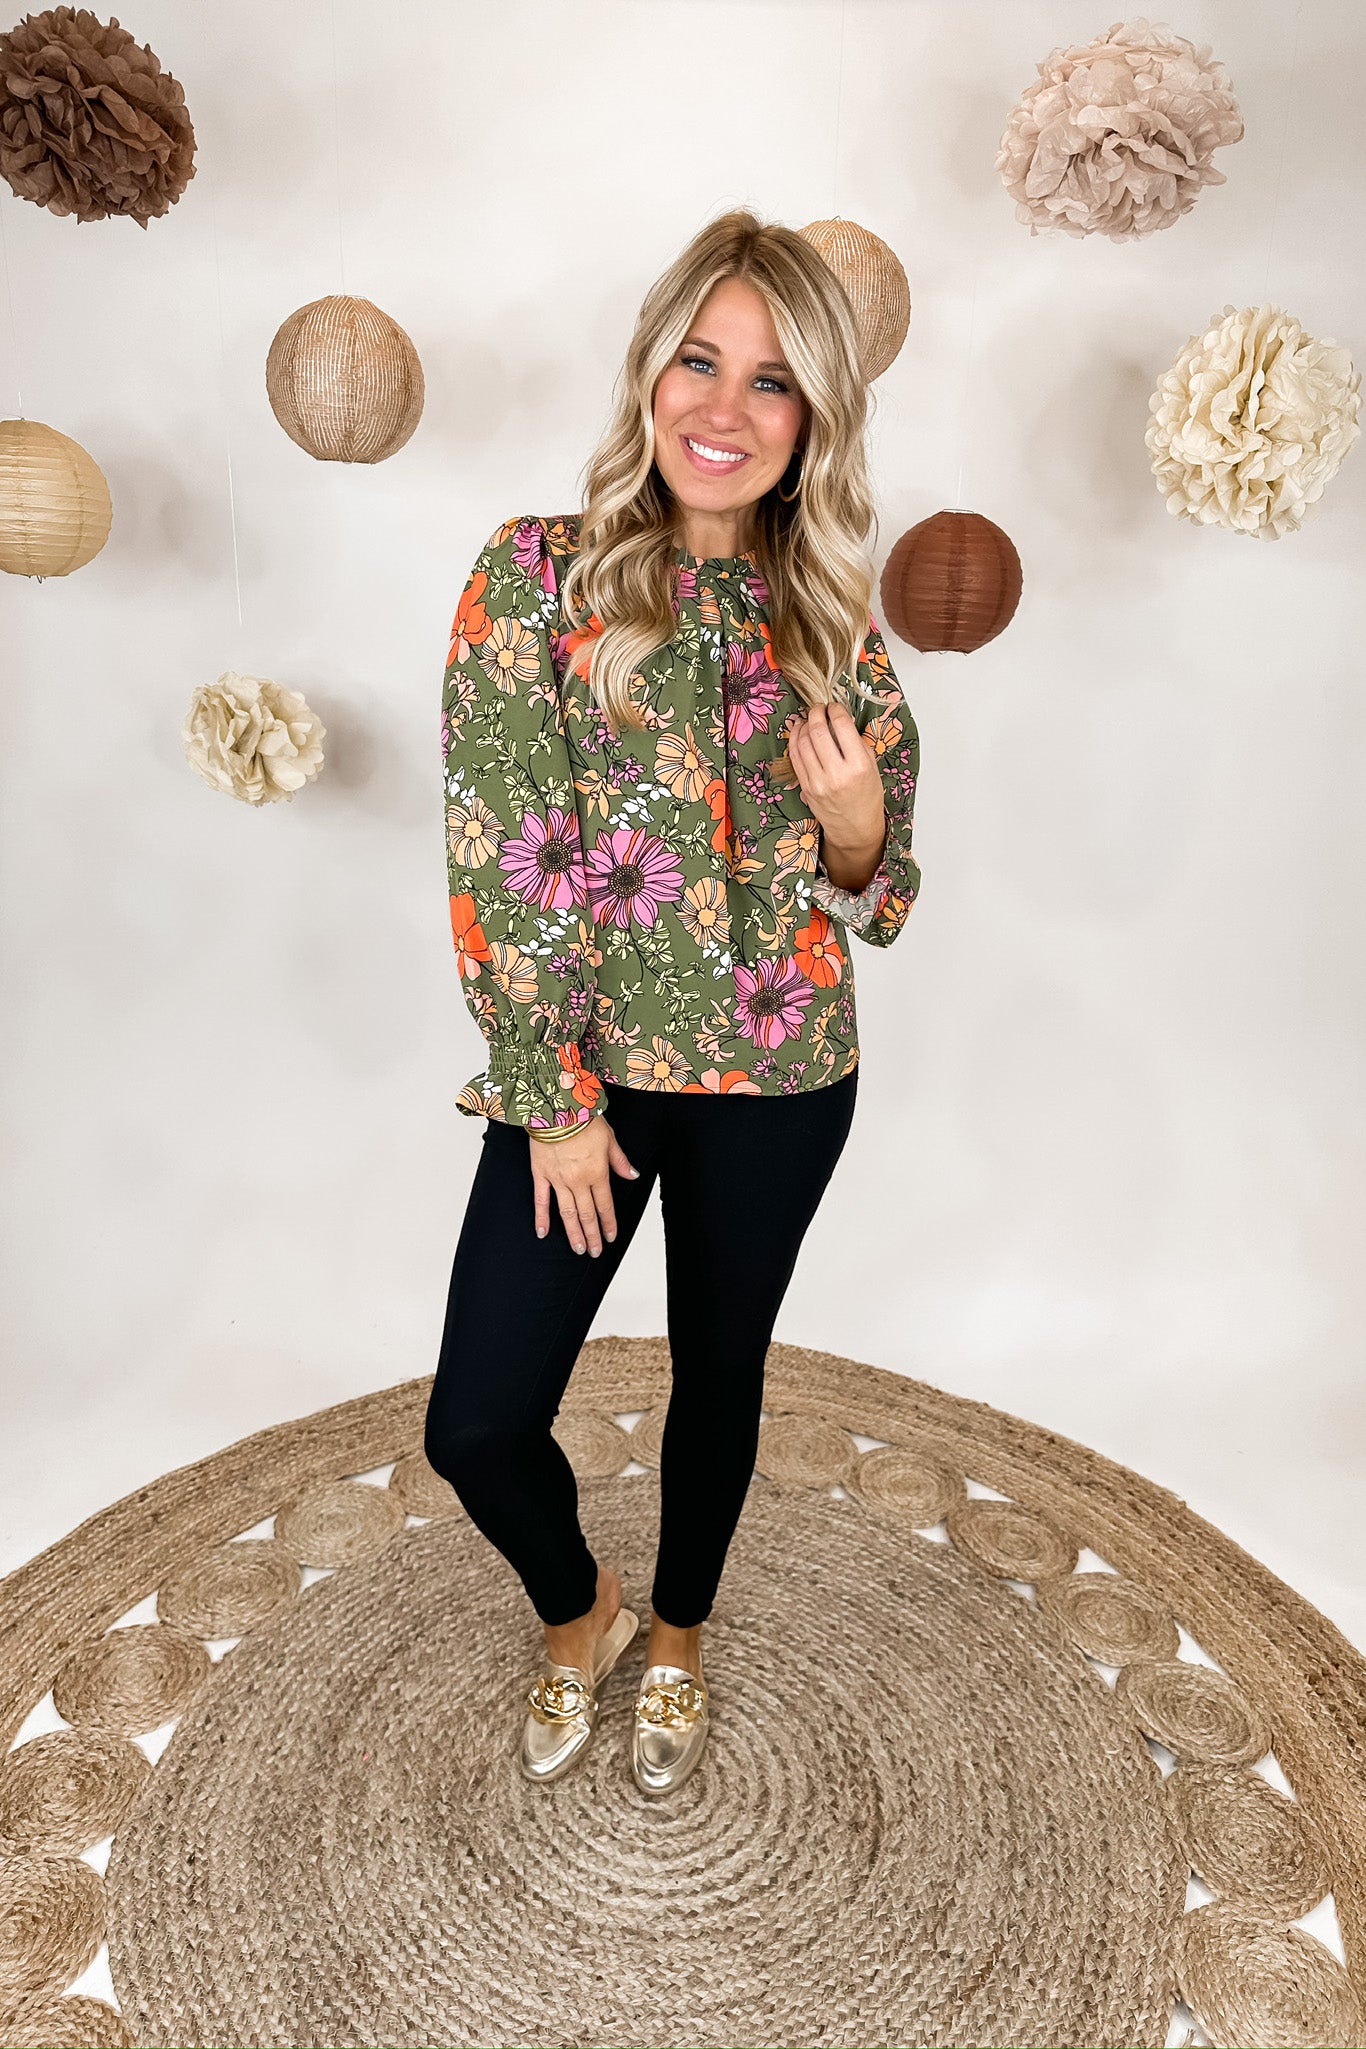 The Quinn Vintage Petals Top by Michelle McDowell